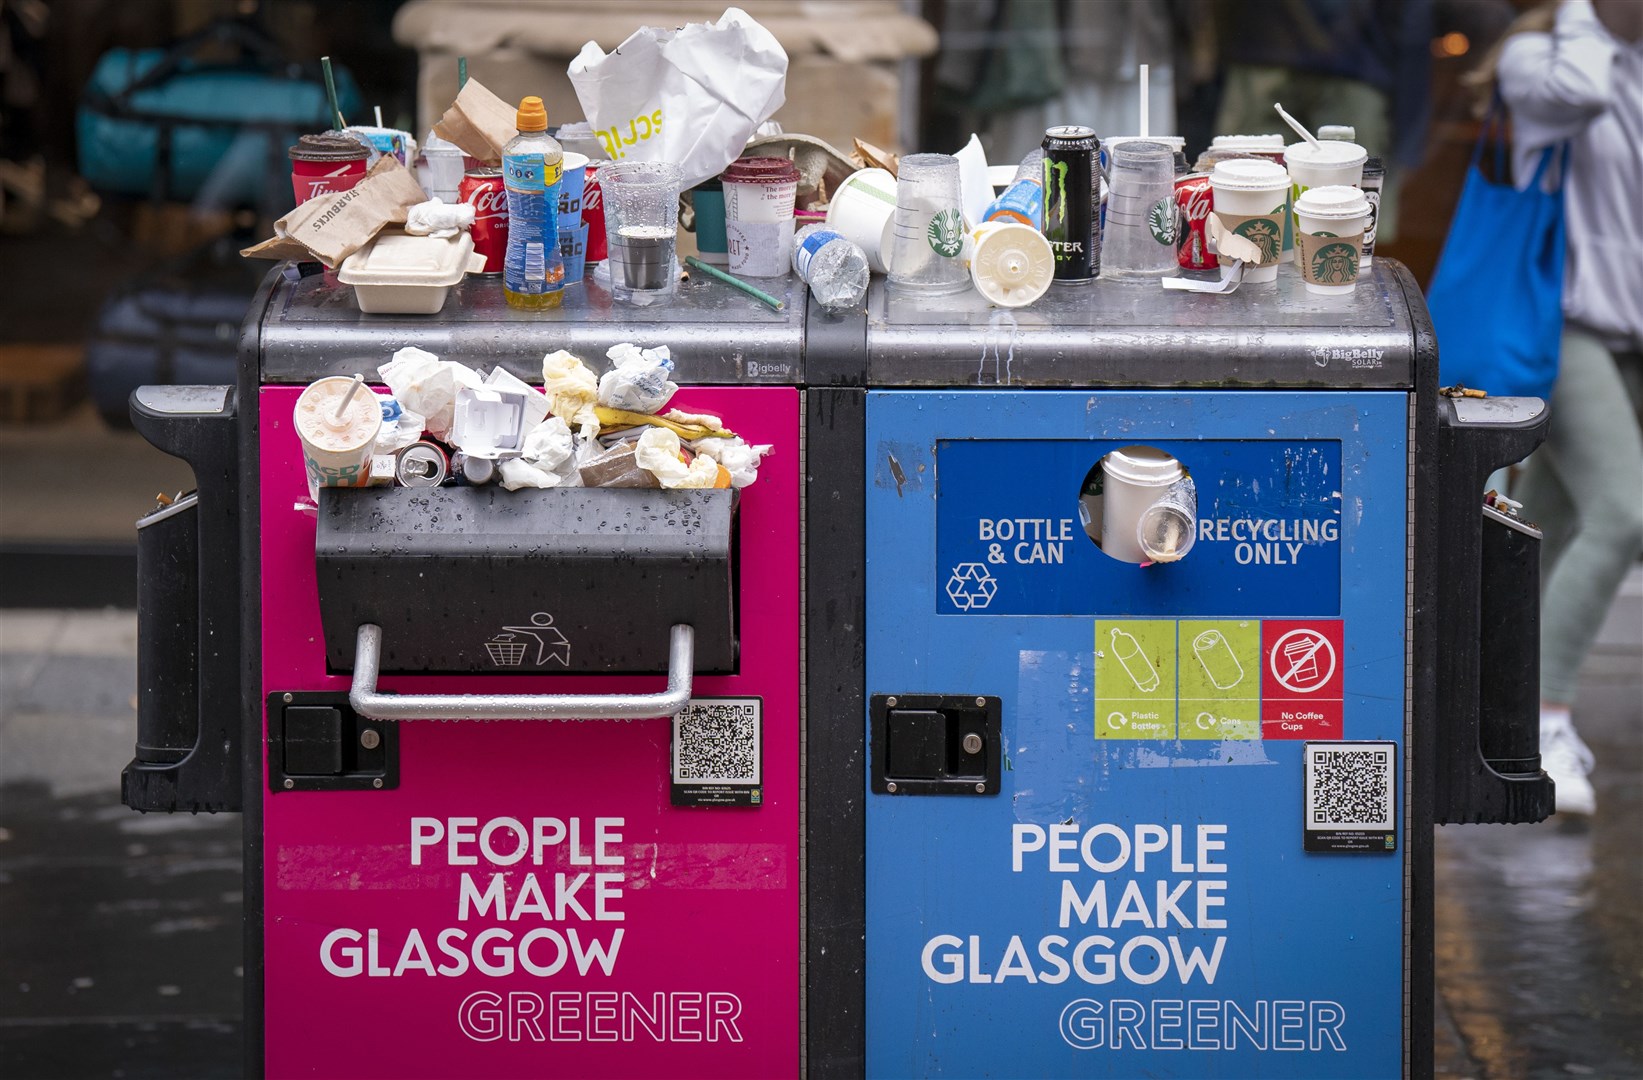 Rubbish piled up in Glasgow during the strike (Jane Barlow/PA)